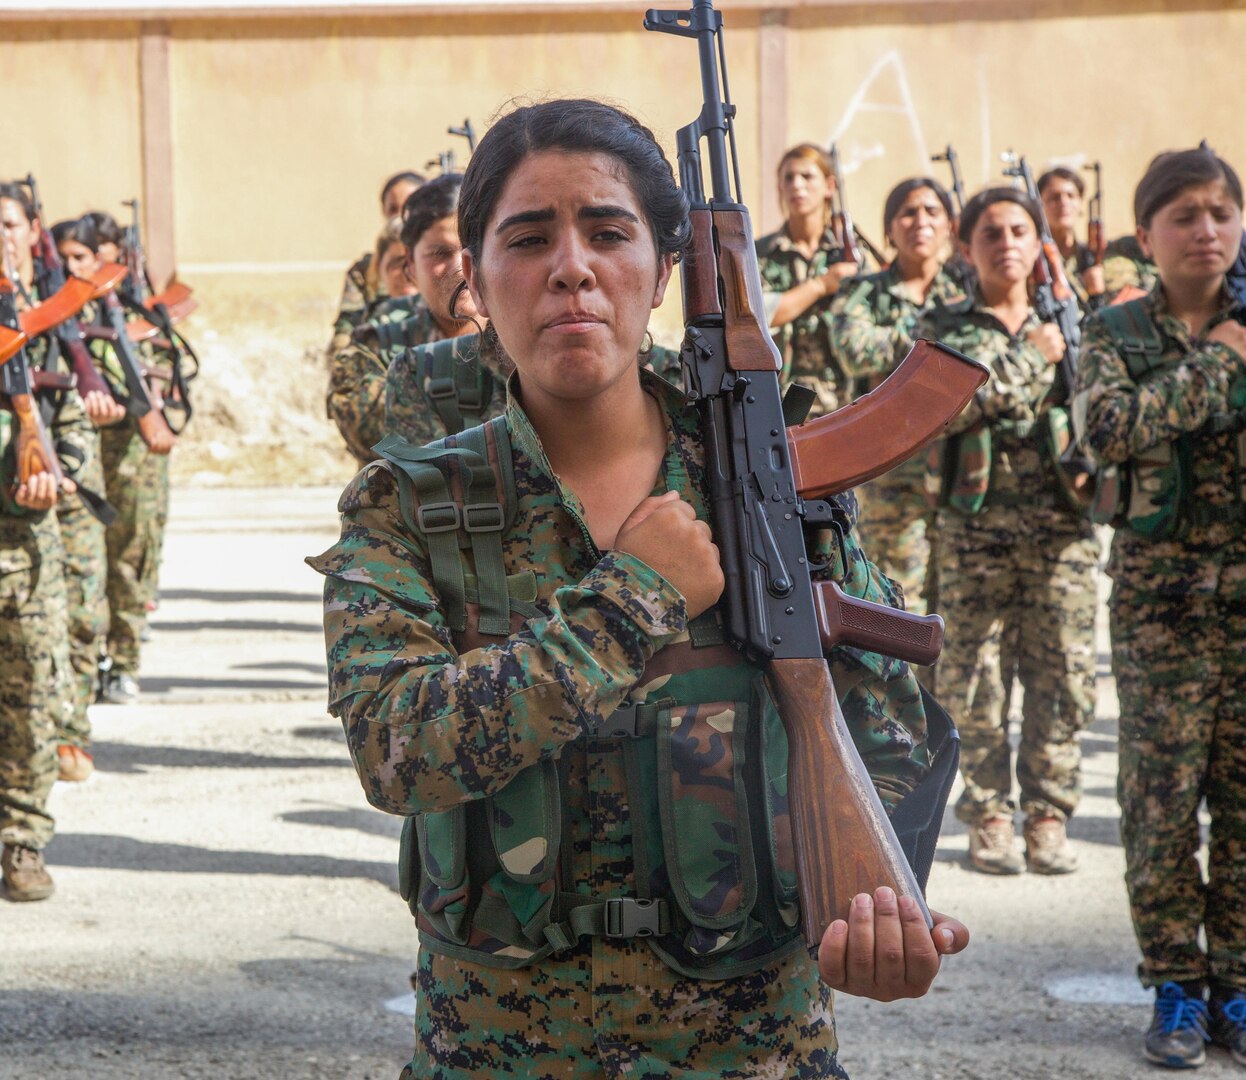 Syrian Democratic Forces trainees, representing an equal amount of Arab and Kurdish volunteers, stand in formation.